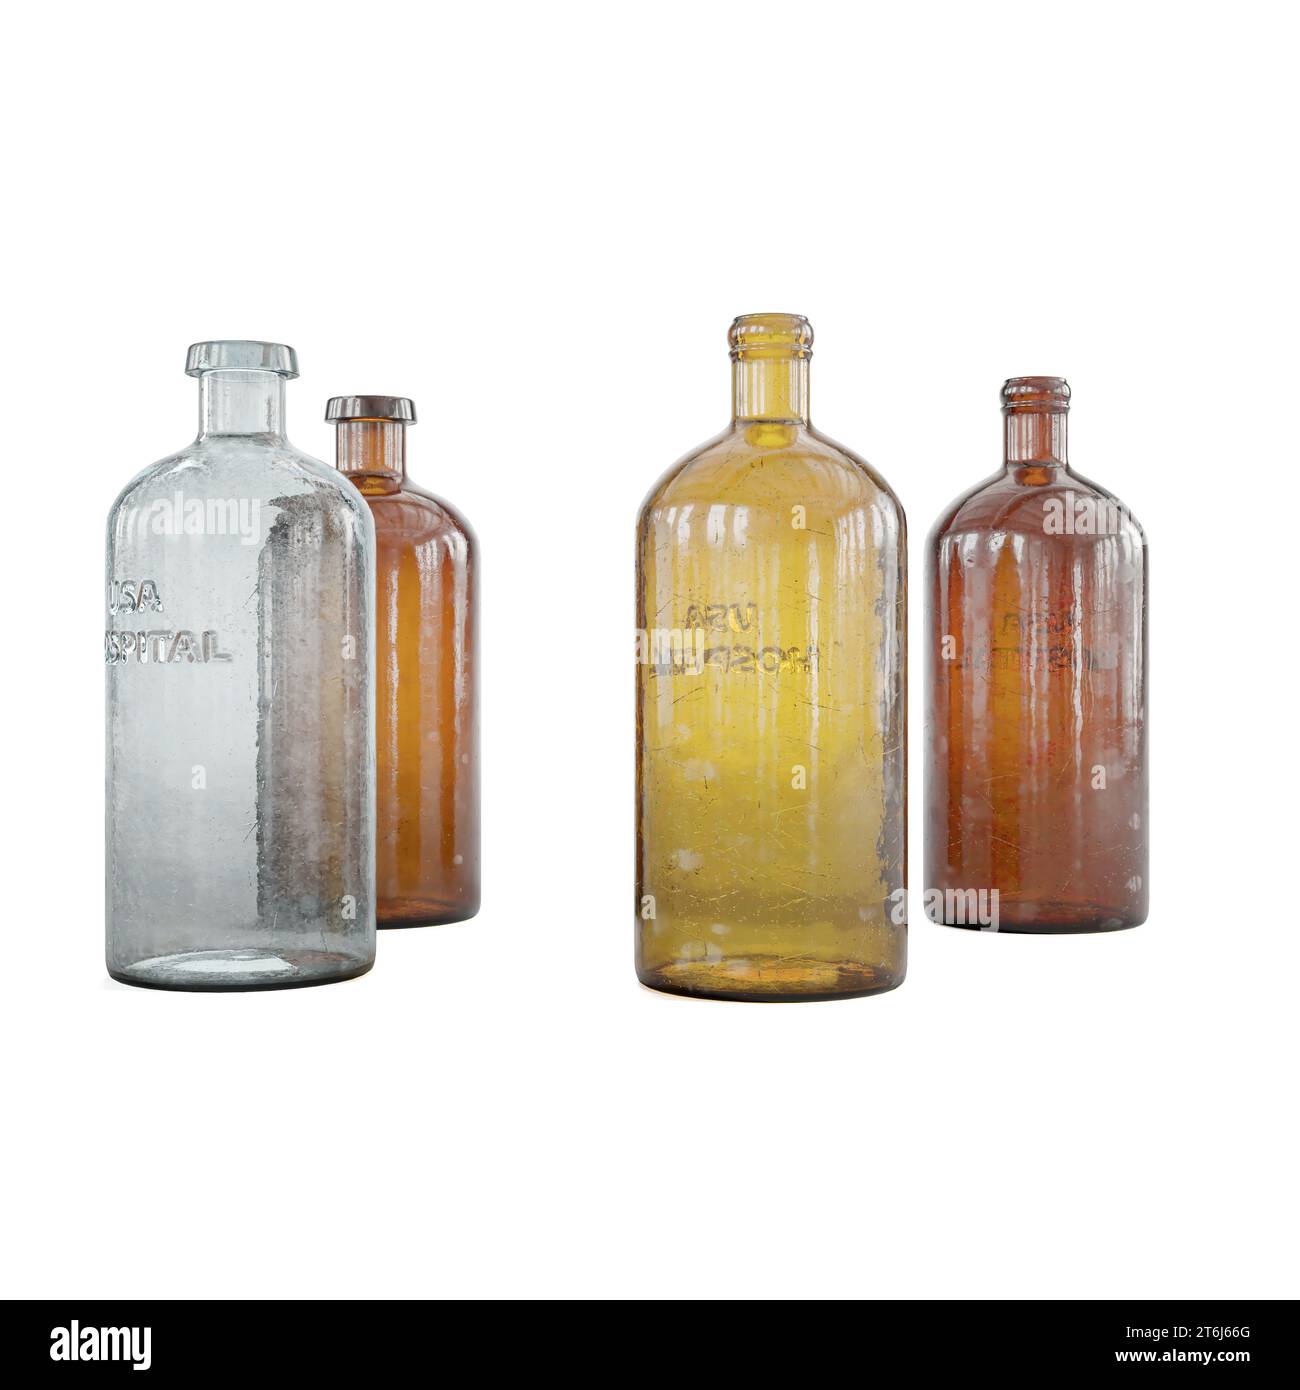 Three vintage glass bottles of varying sizes and shapes, isolated against a white background Stock Photo